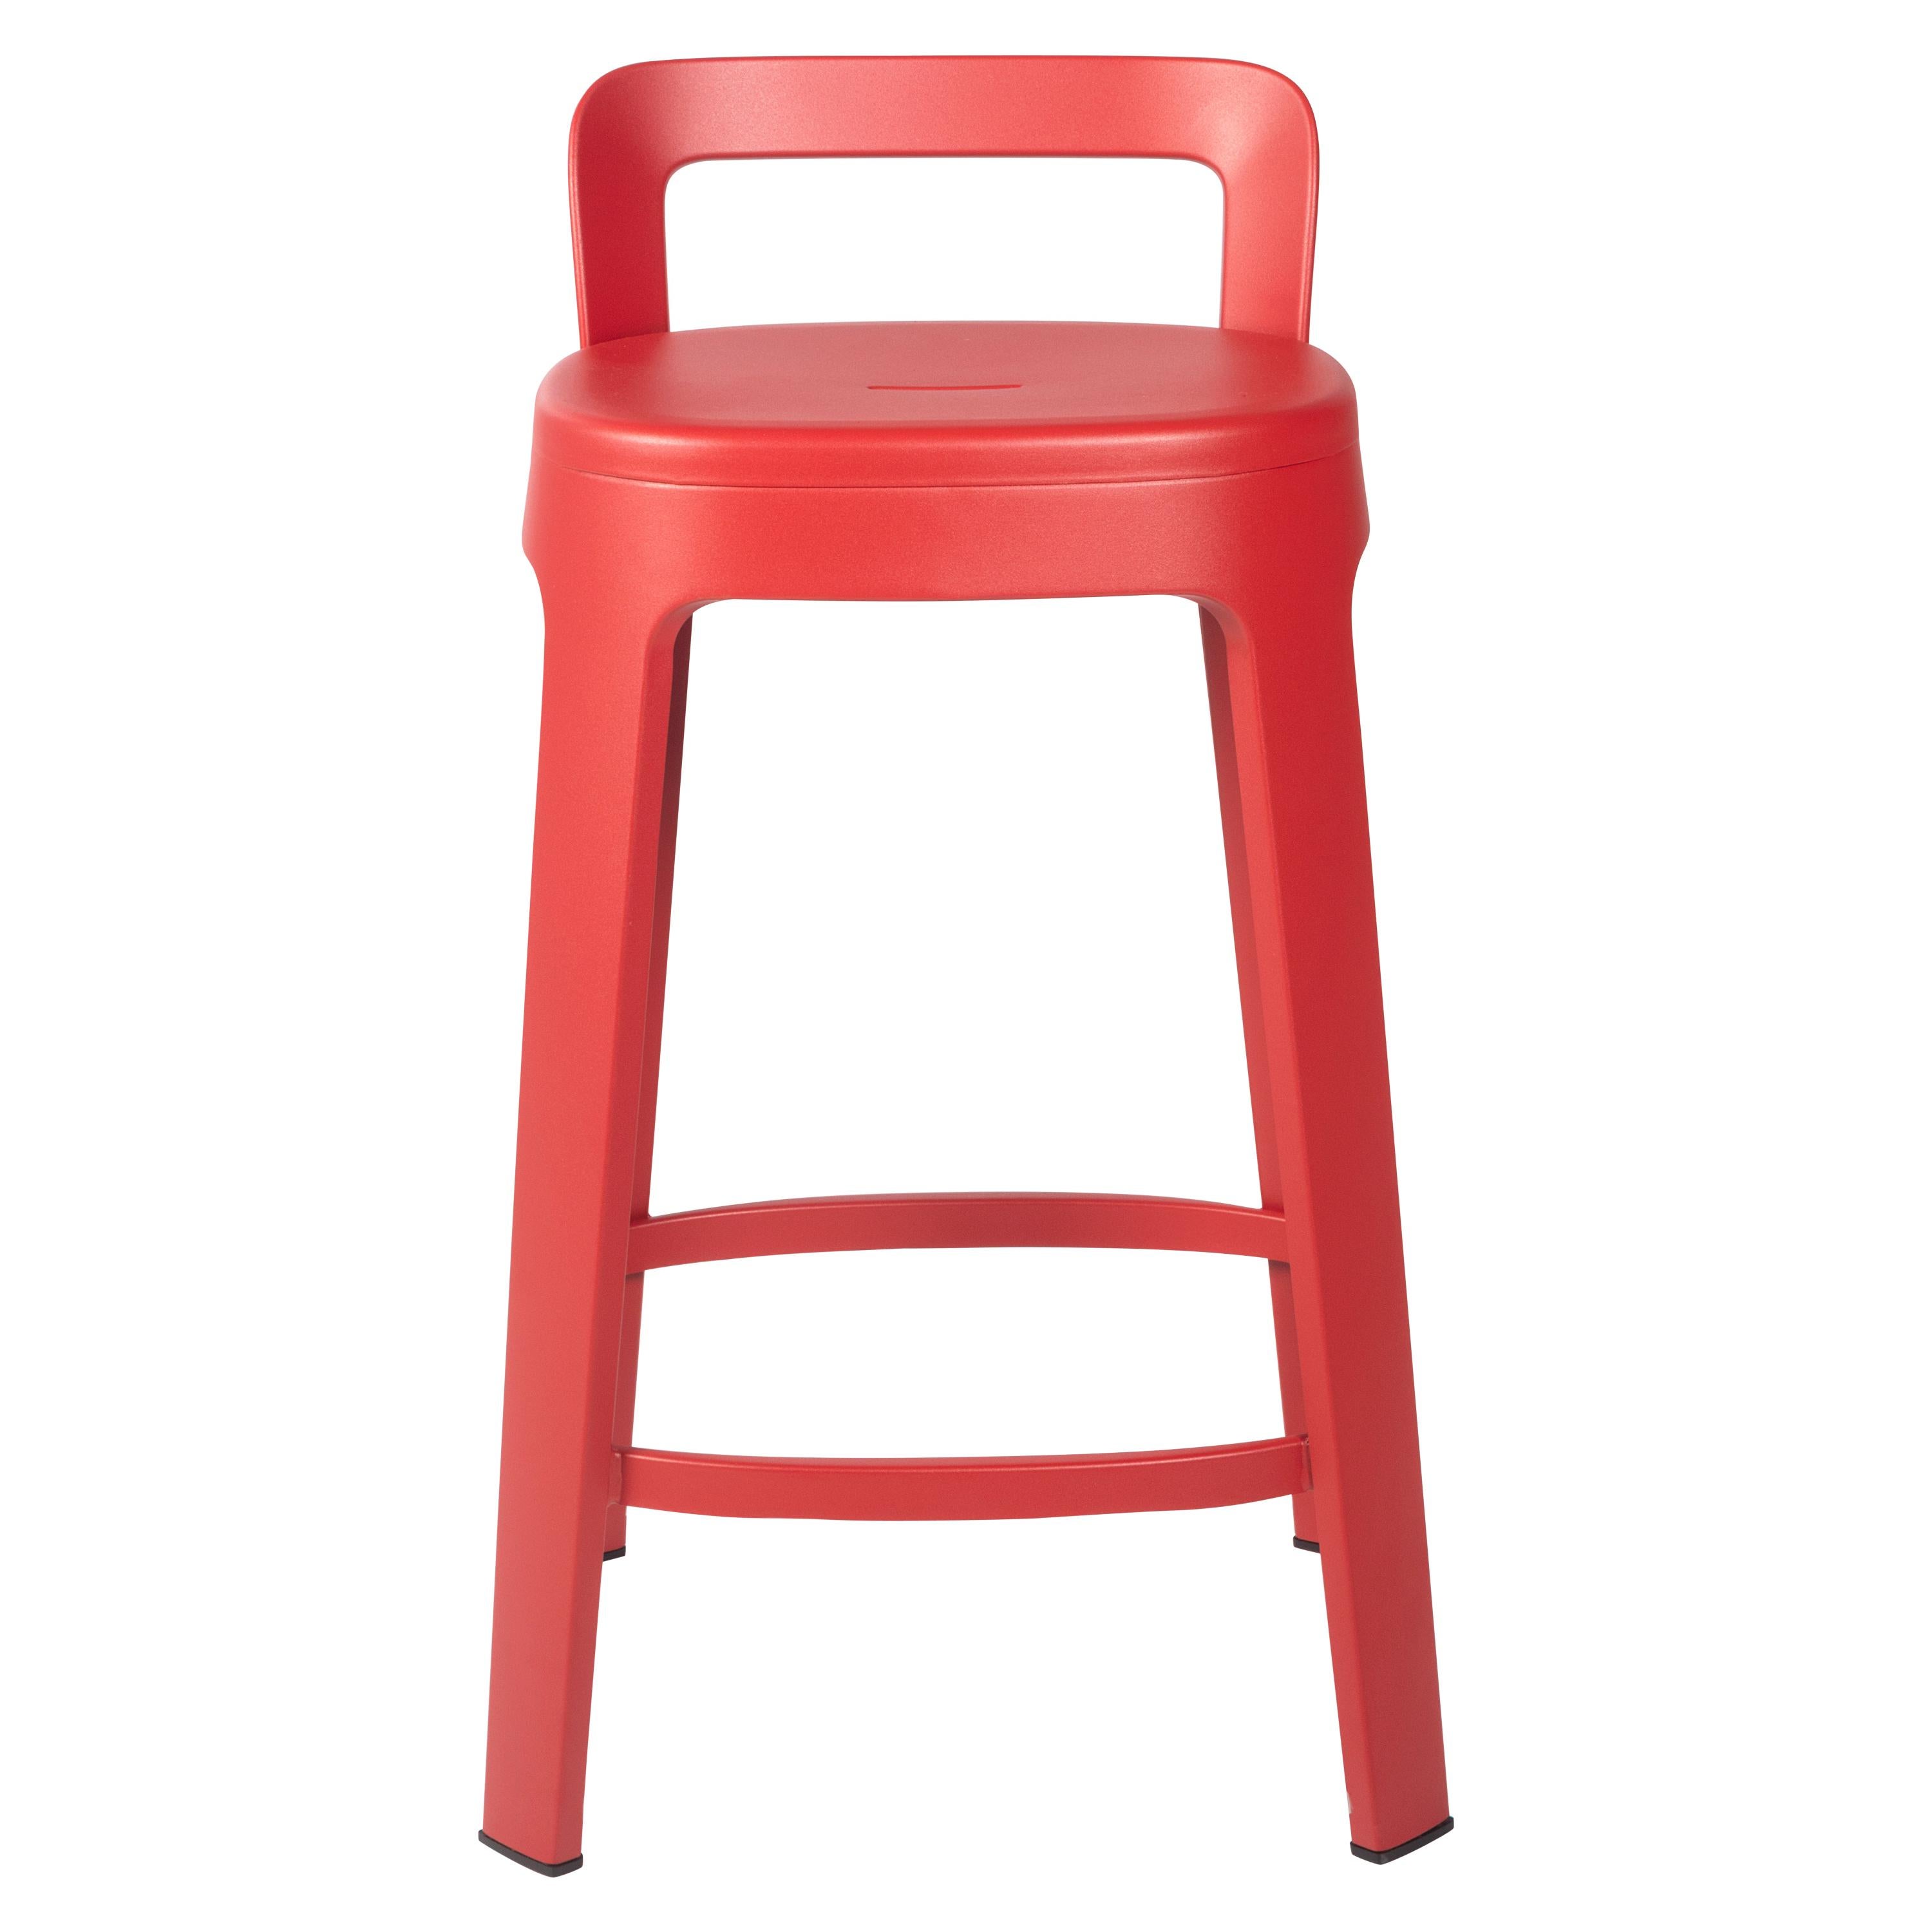 Ombra Counter Stool with Backrest, Red by Emiliana Design Studio For Sale